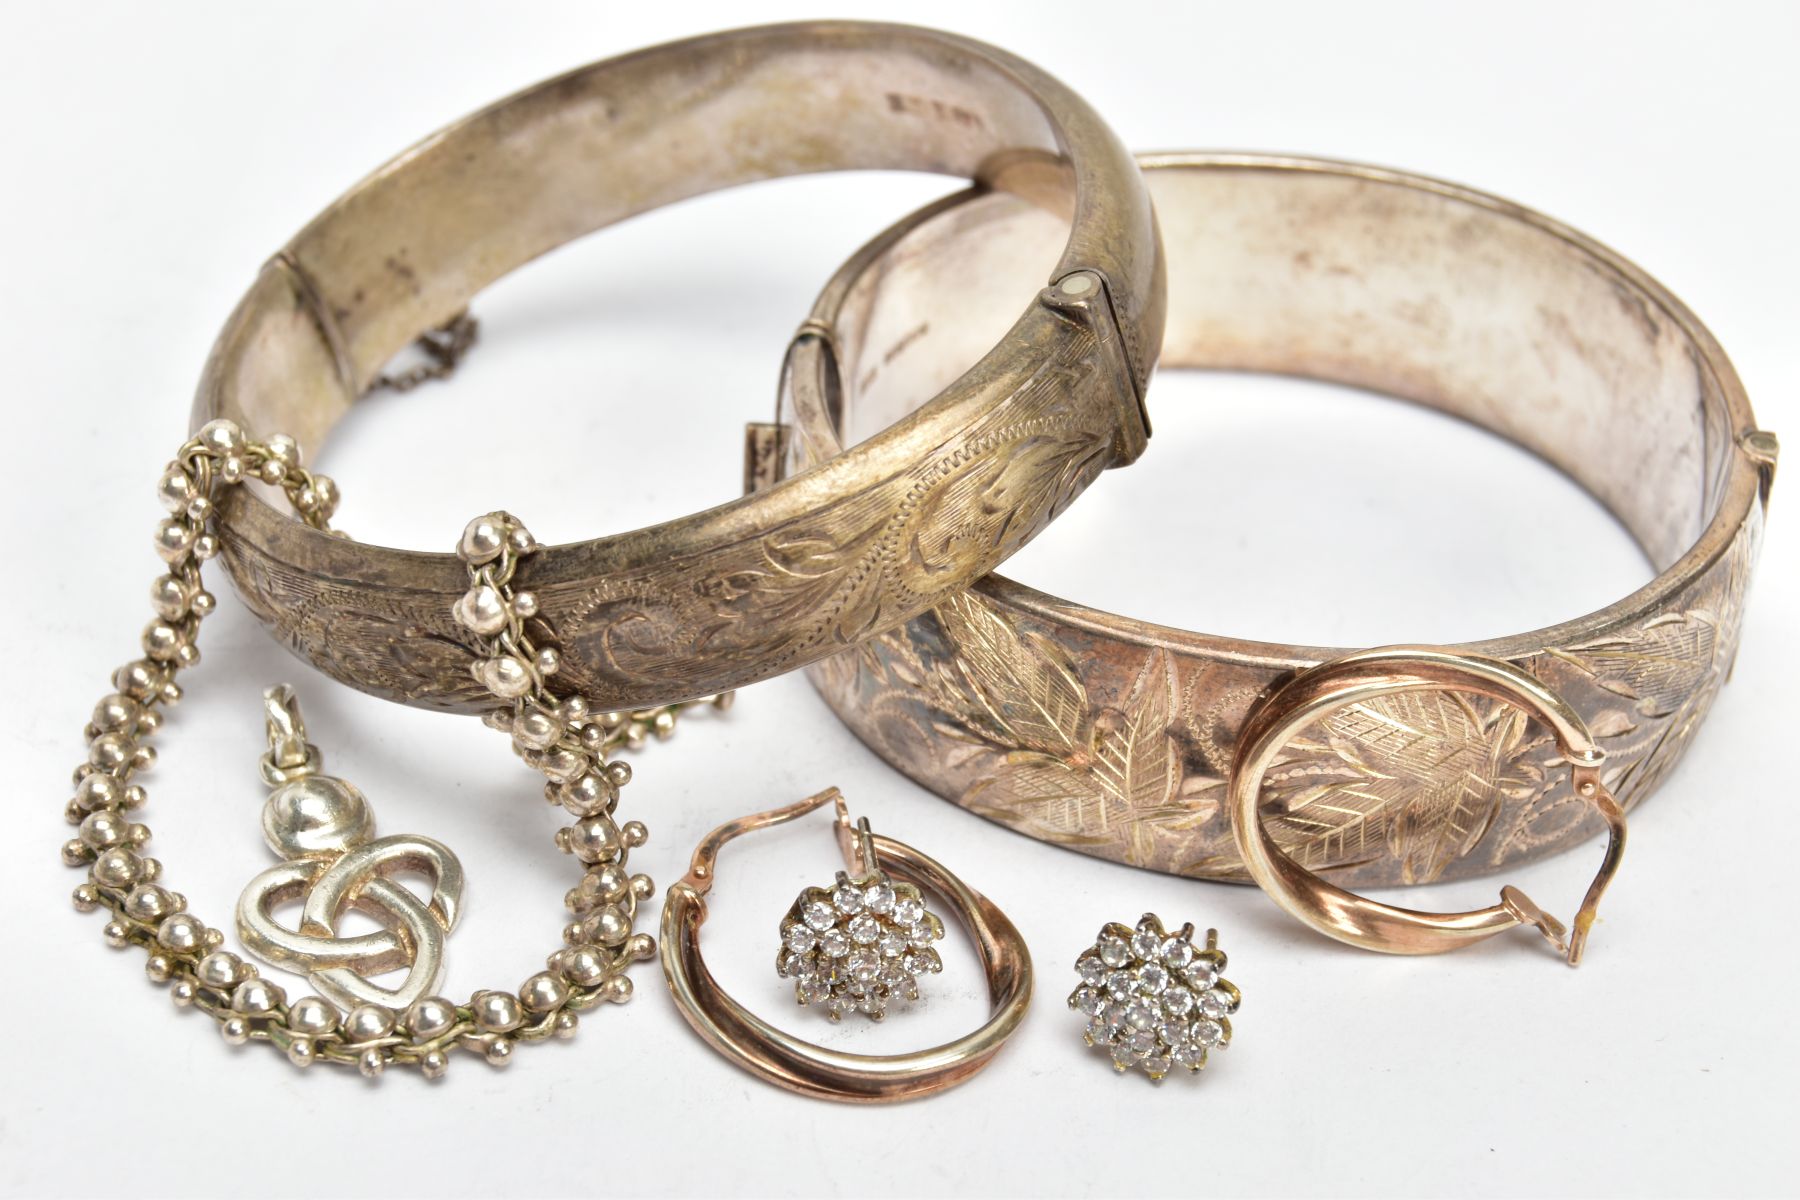 TWO SILVER BANGLES, EARRINGS AND A BRACELET, to include a wide hinged bangle decorated with a floral